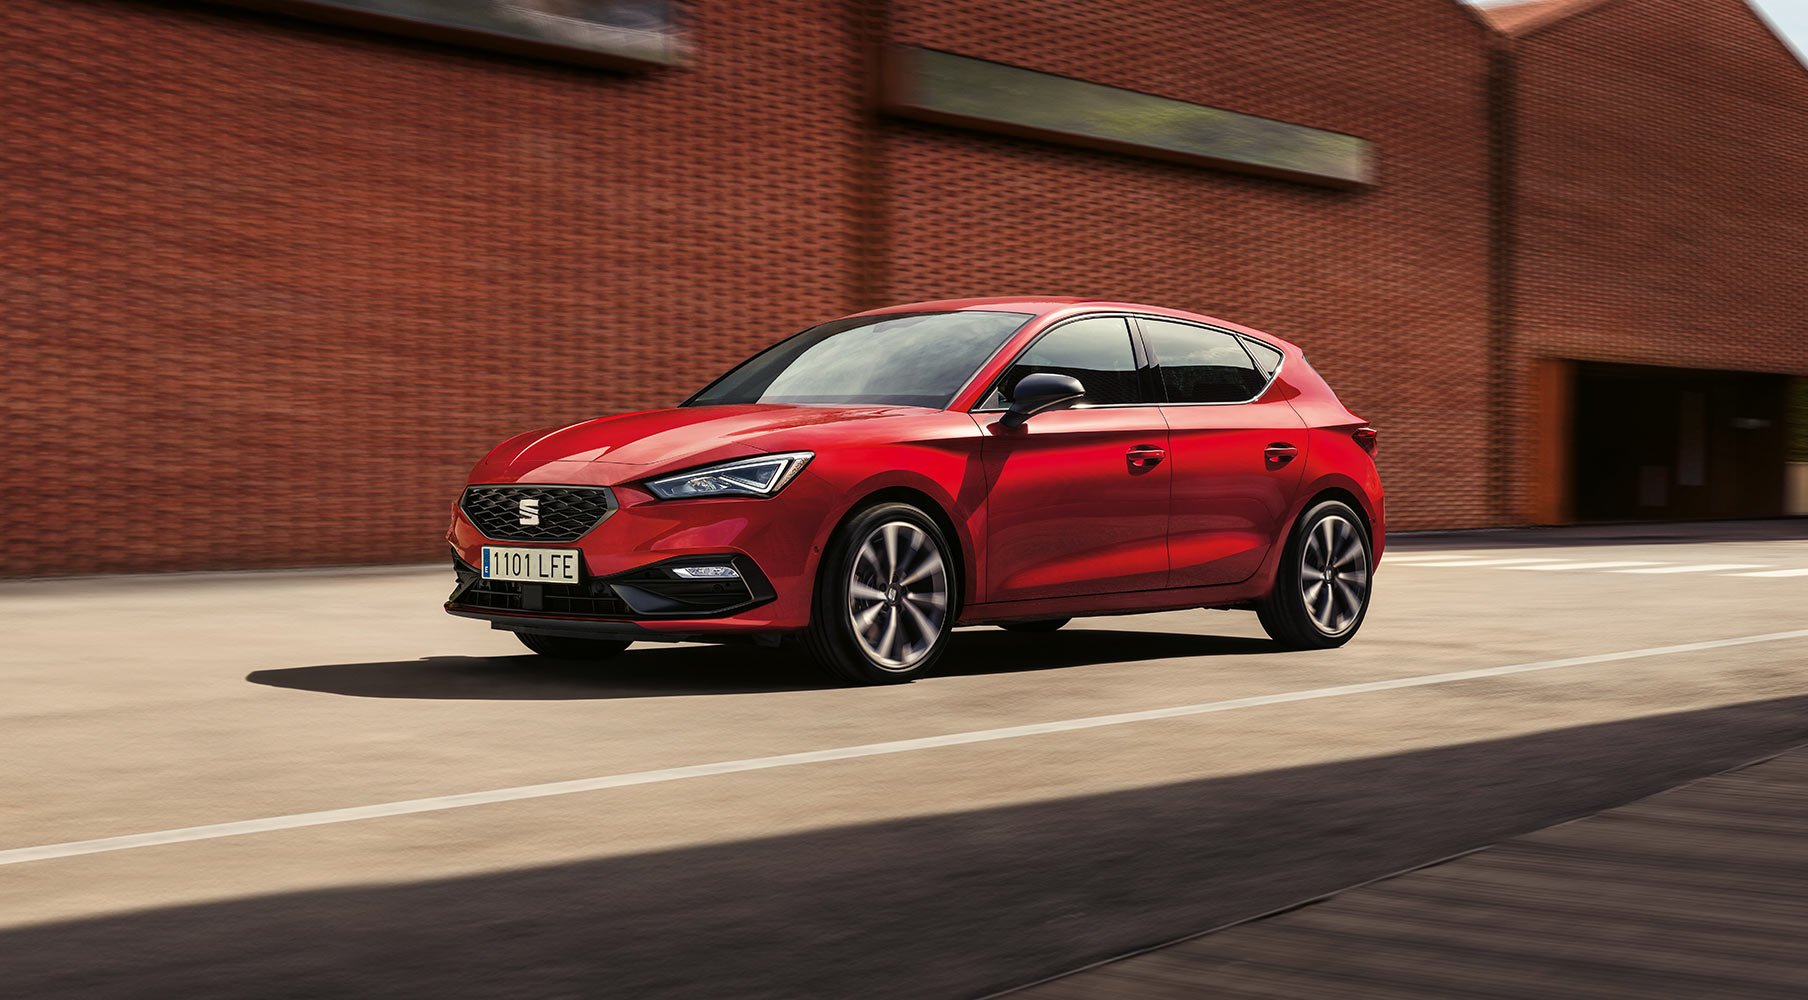 SEAT new car deals and offers – SEAT Leon Sportstourer family car estate car